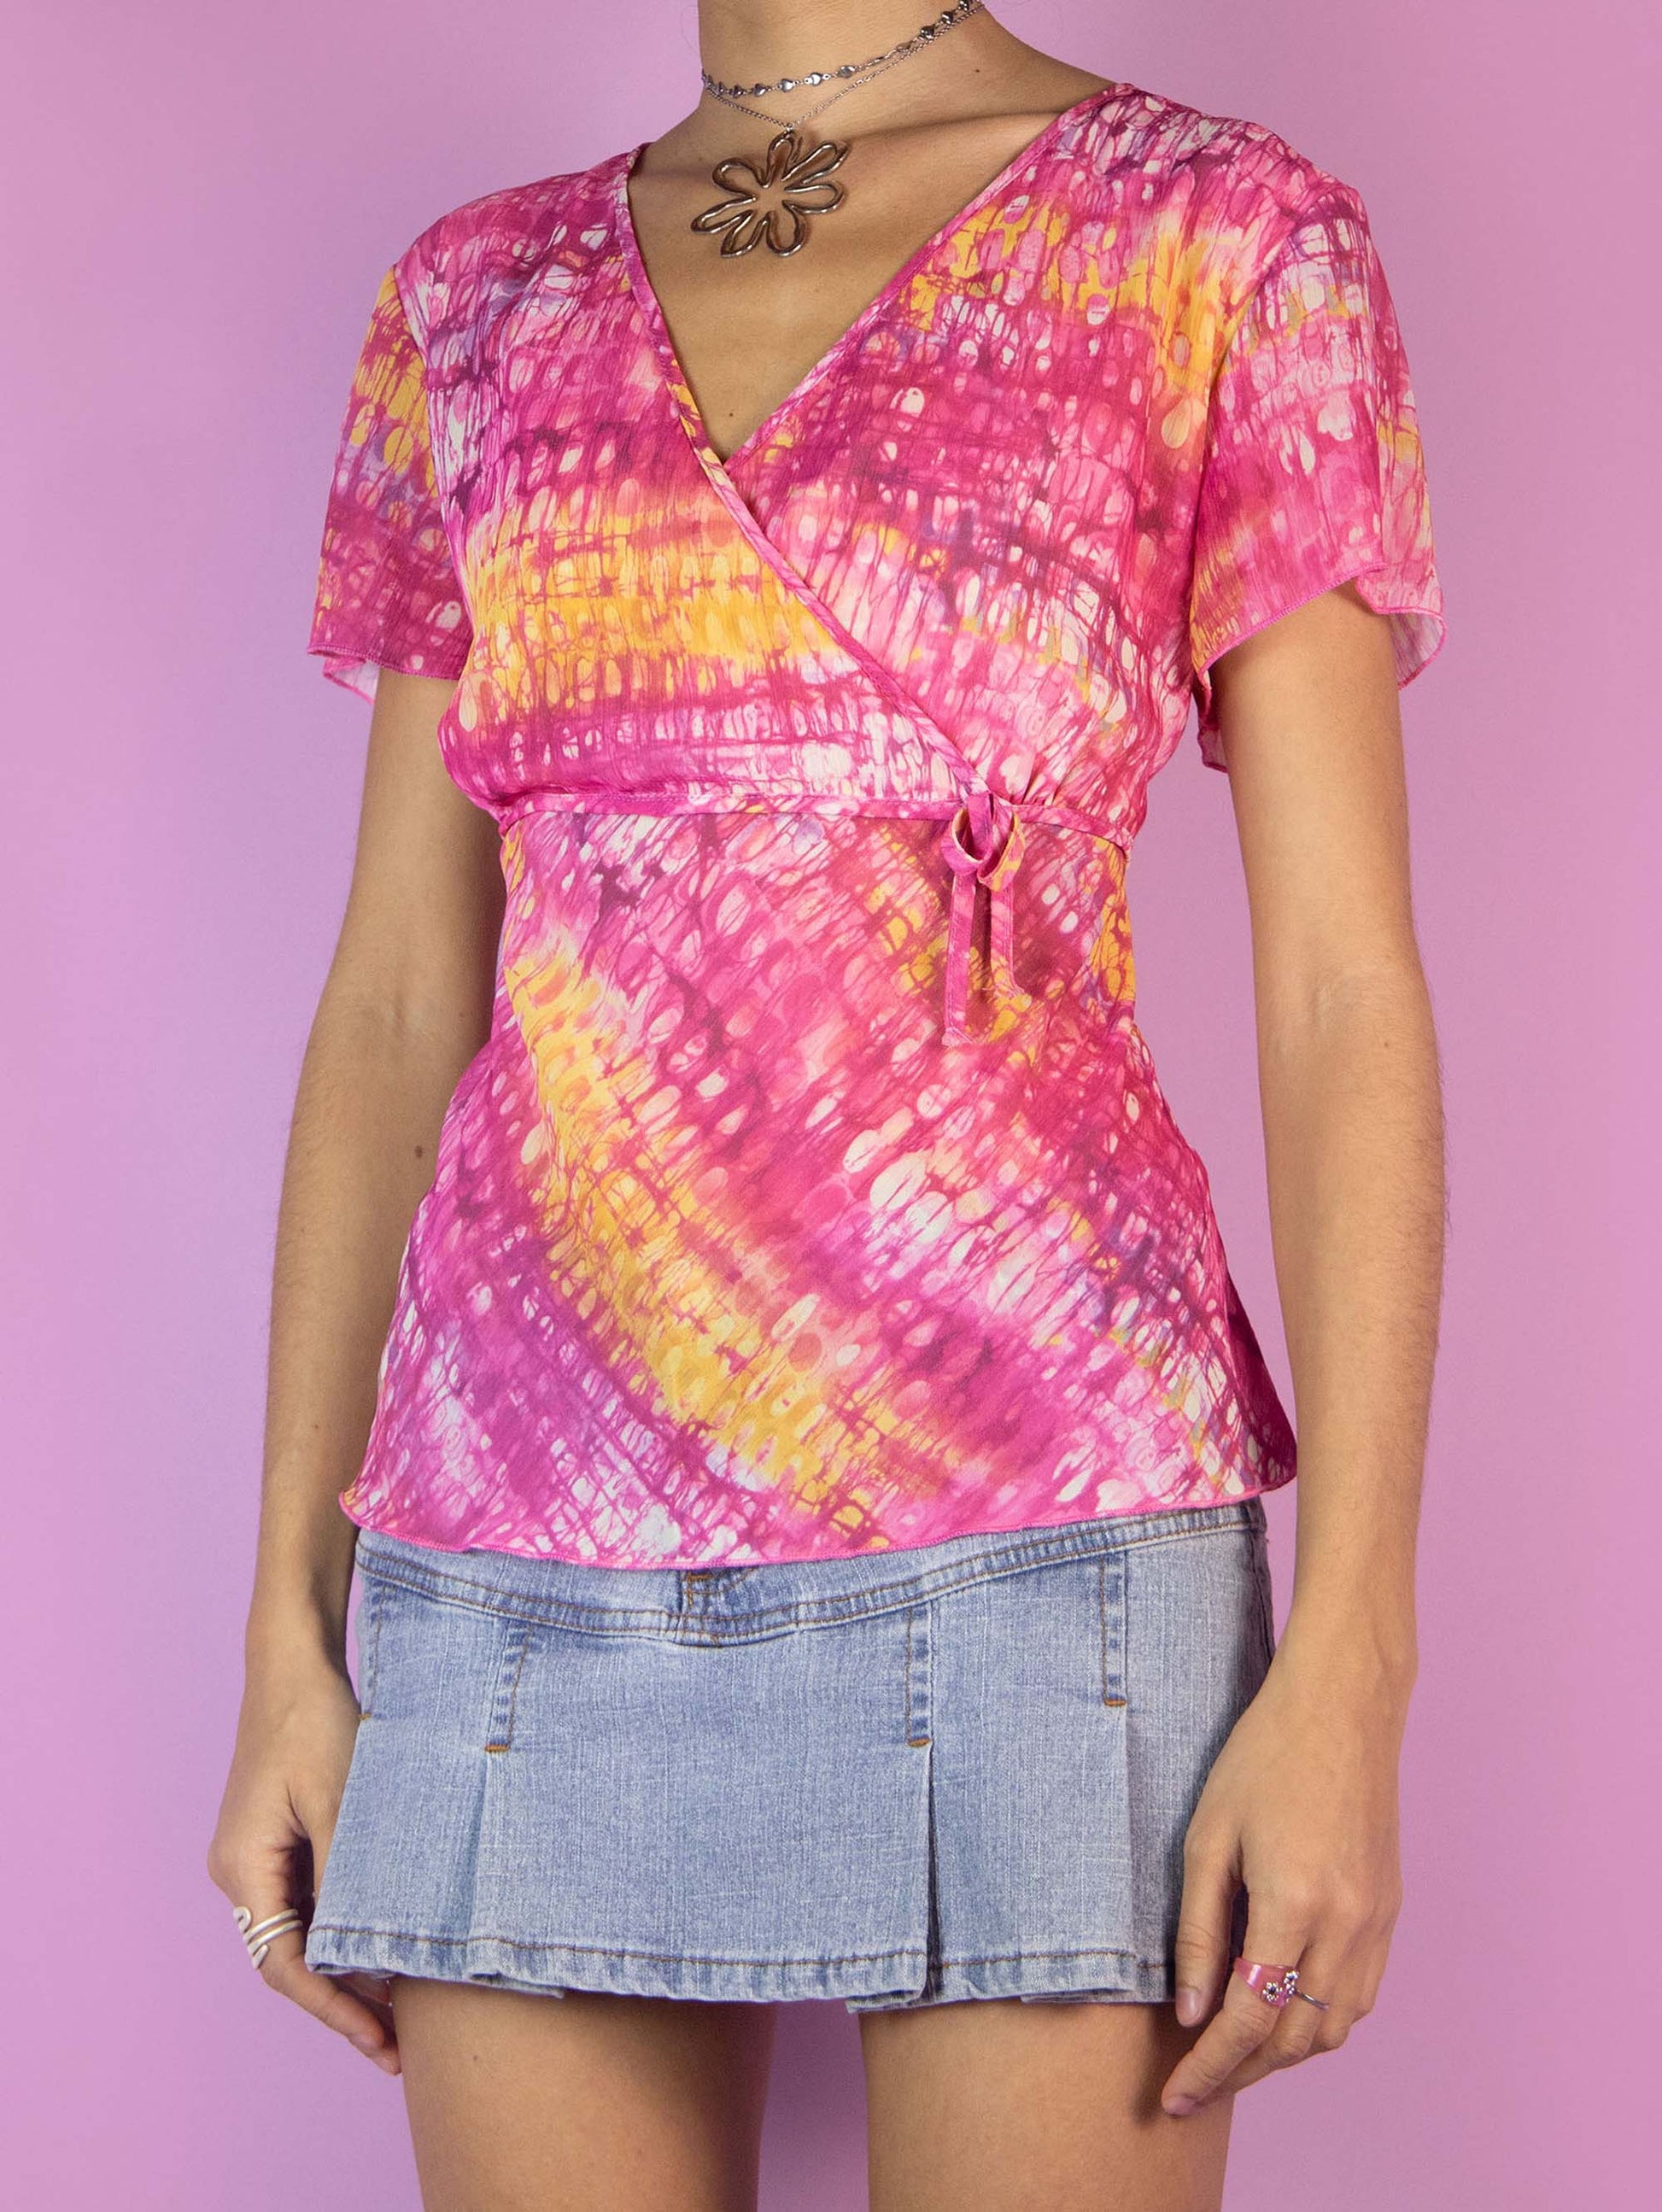 The Y2K Pink Sheer Graphic Top is a vintage short-sleeved shirt with an abstract pink and yellow tie-dye print, featuring a V-neckline. Cyber 2000s summer festival psychedelic blouse.